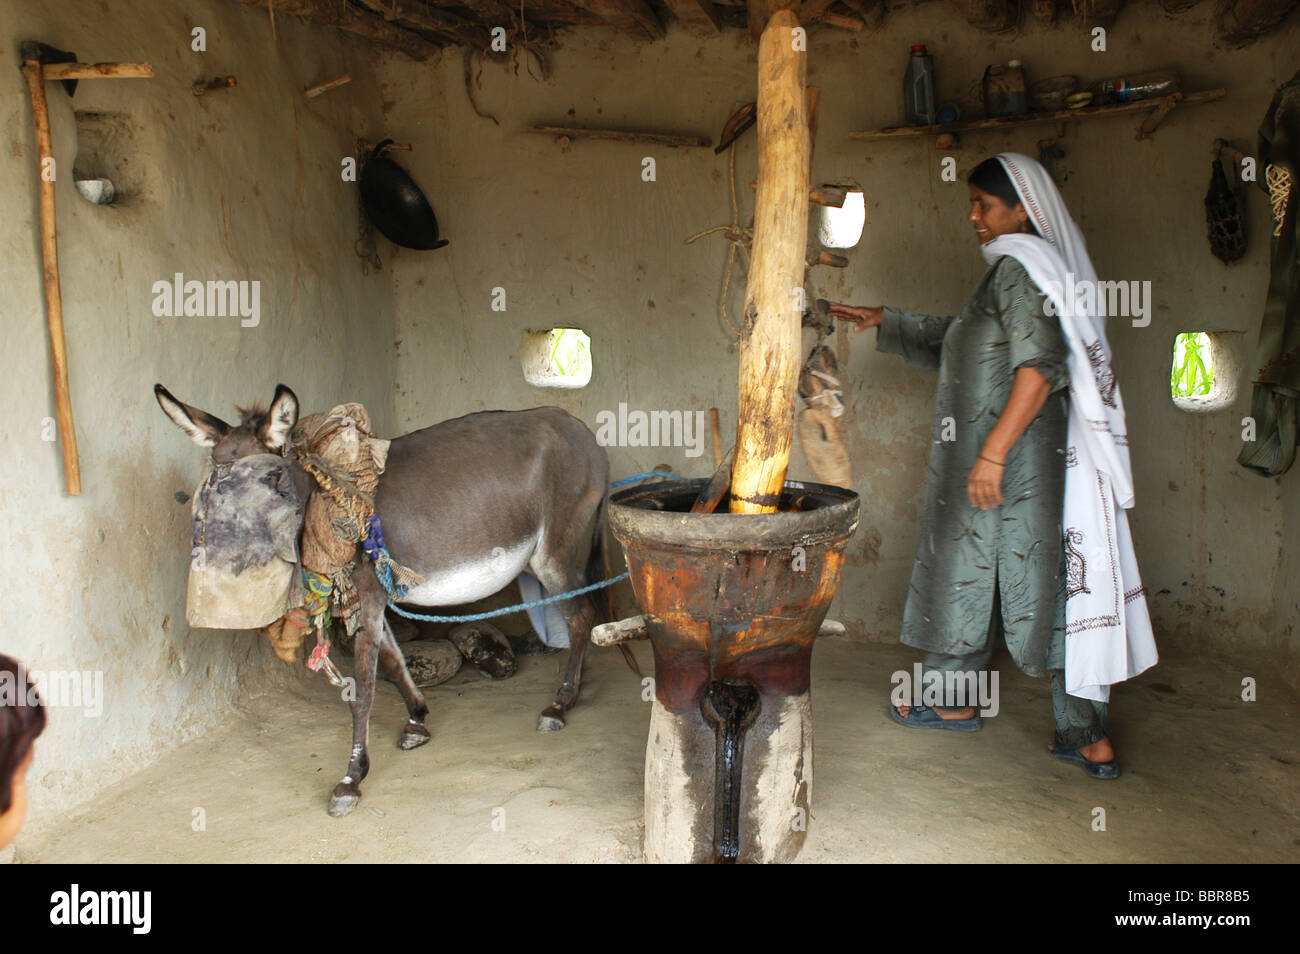 Churning milk to make butter and cheese using a mule with a bag over its eyes in a mud hut Stock Photo